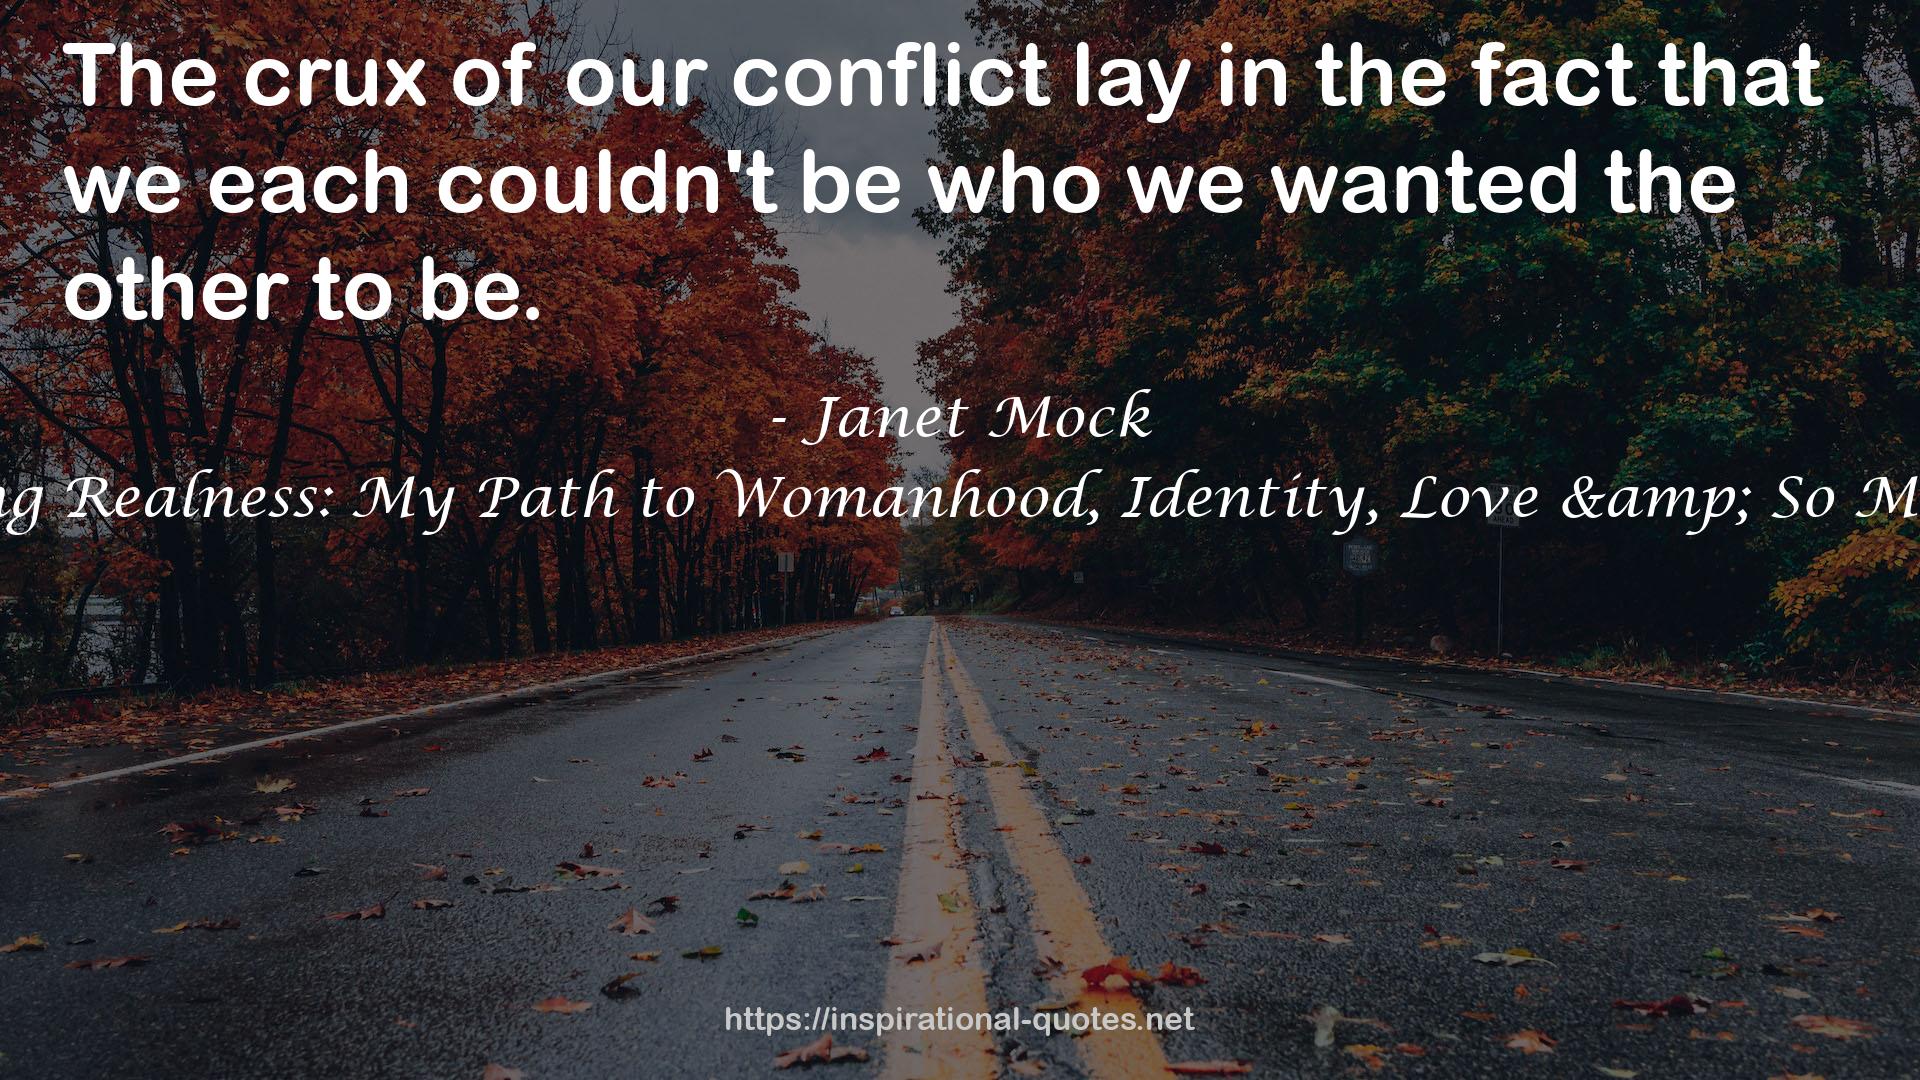 Janet Mock QUOTES